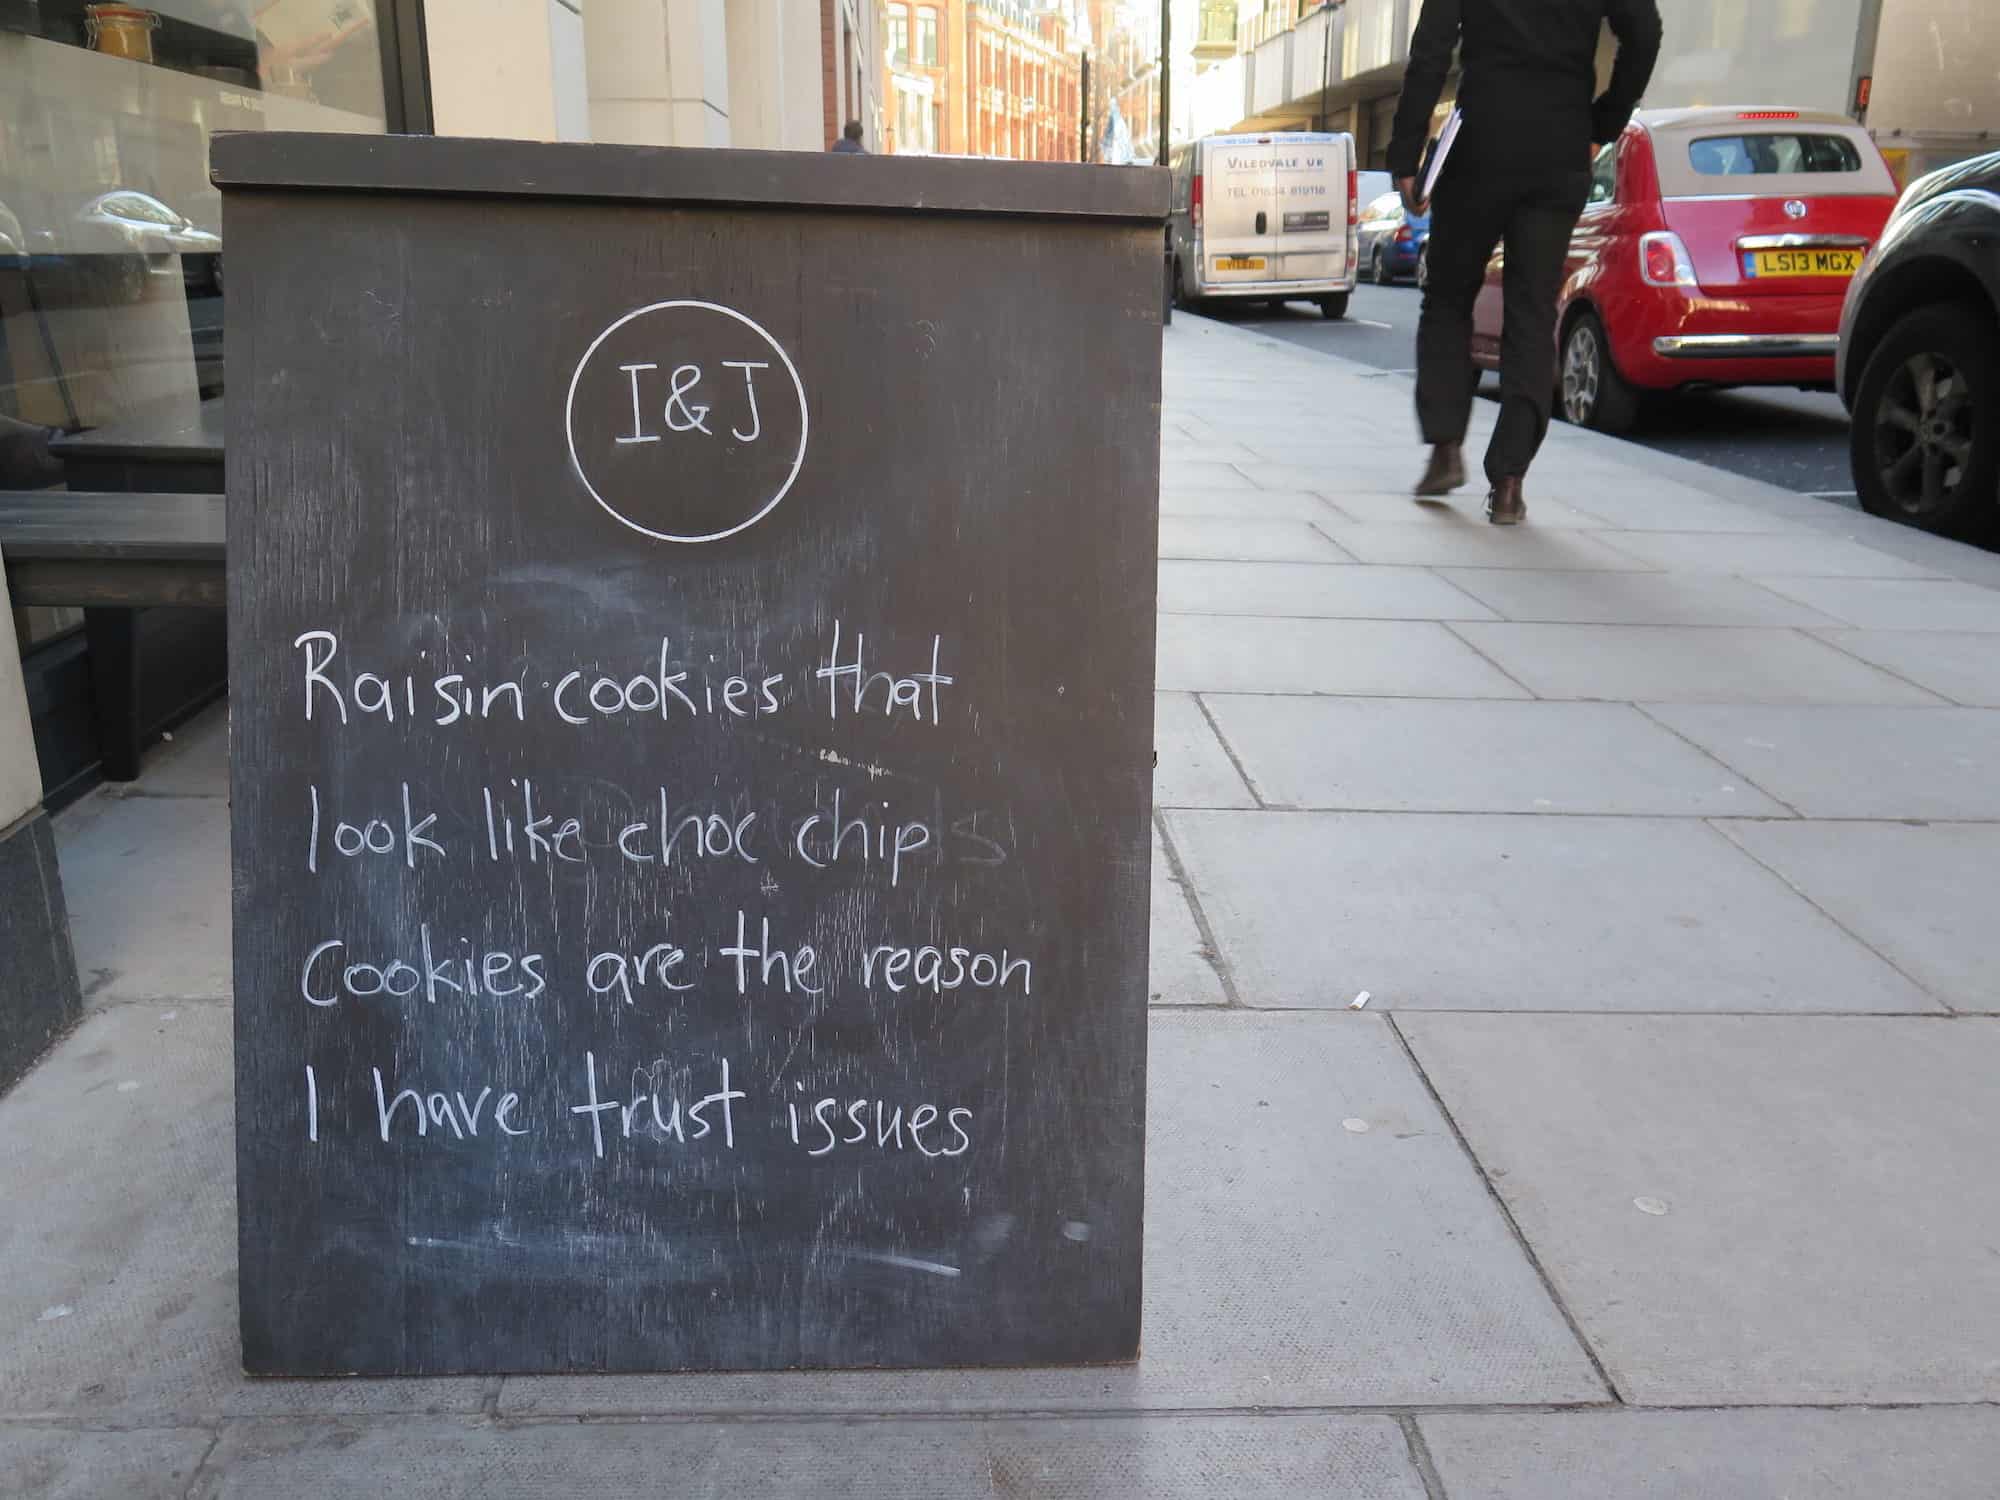 Paris or London for humor? We'd say London for its funny coffee shop street signs.